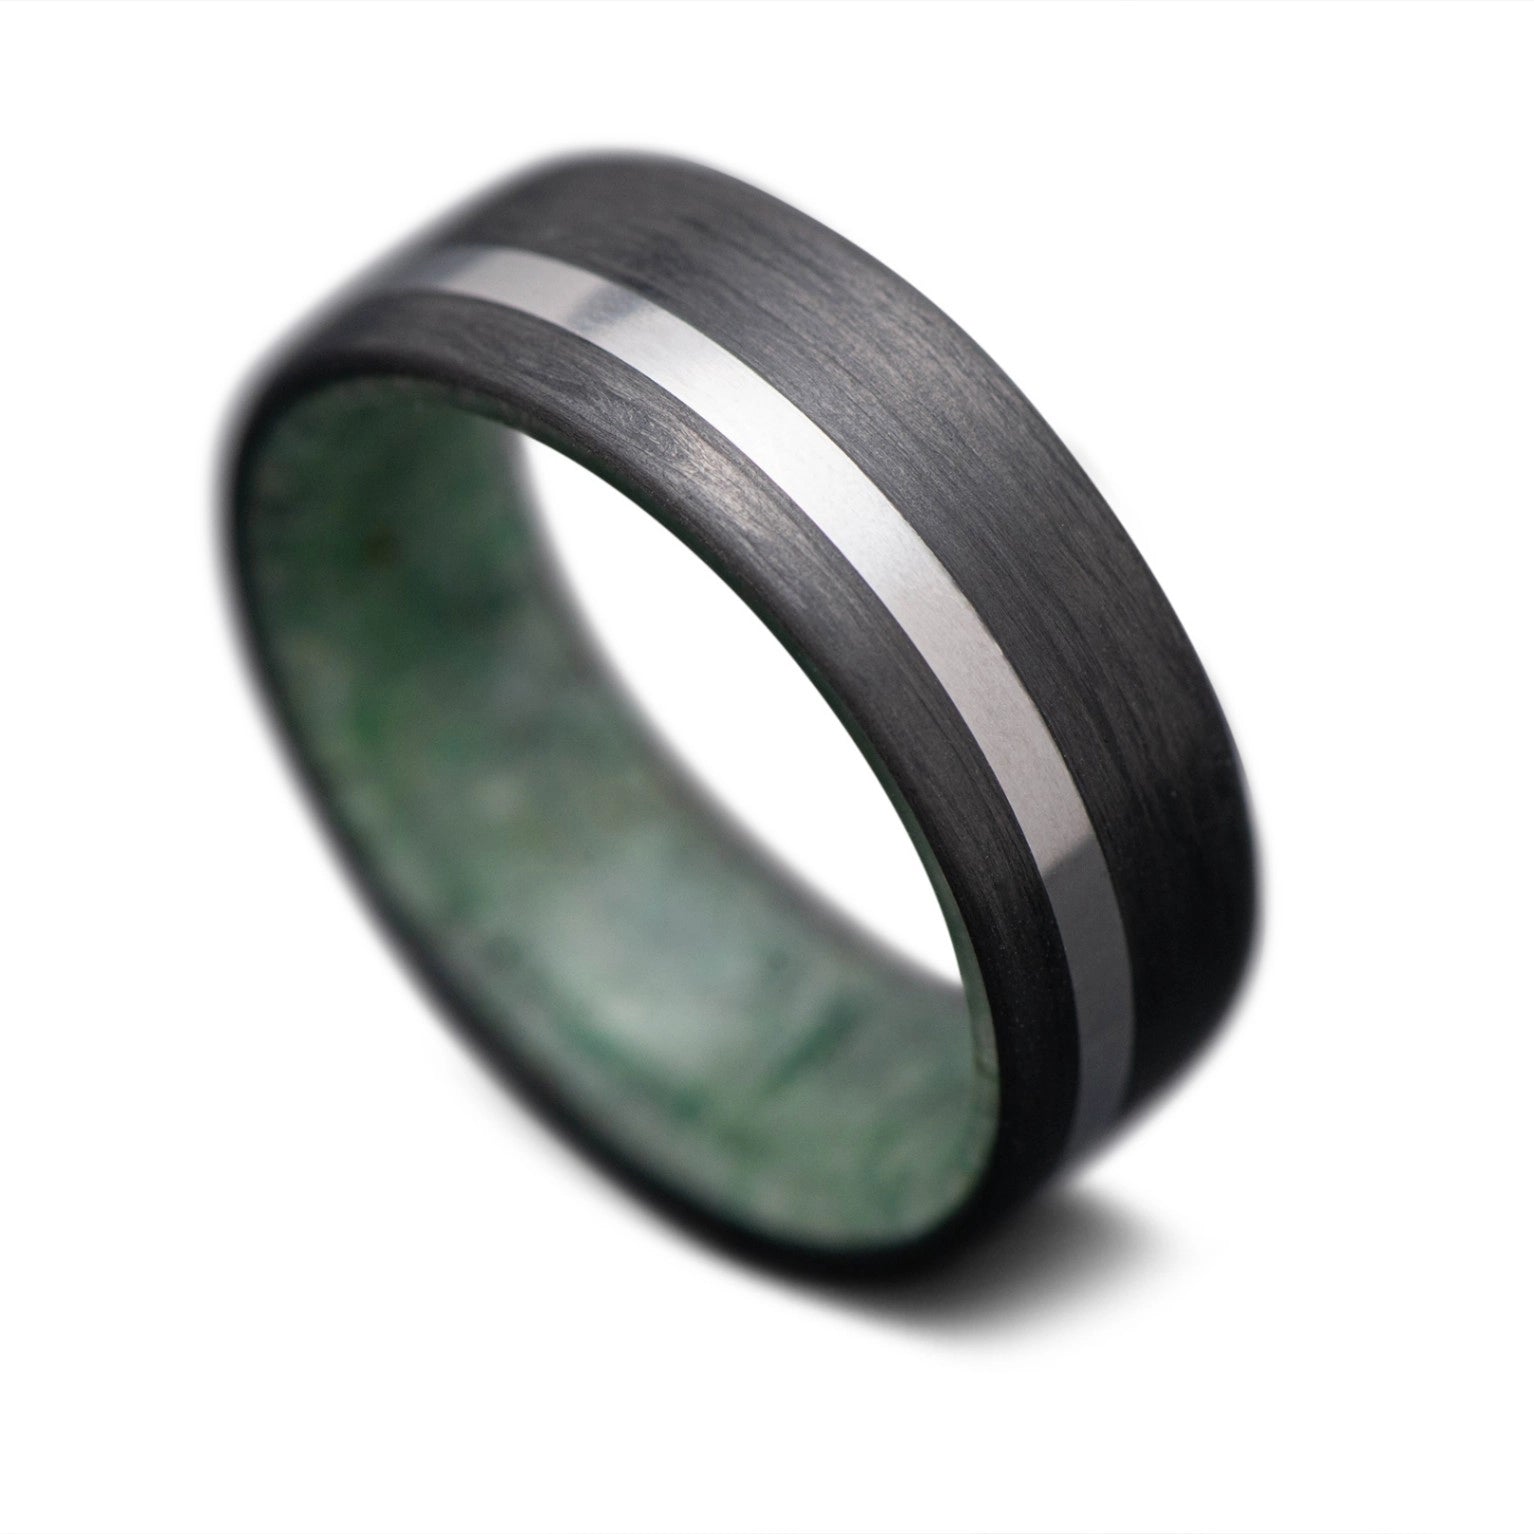 CarbonUni Core ring with Titanium inlay and Moss Agate inner sleeve, 7mm -THE VERTEX